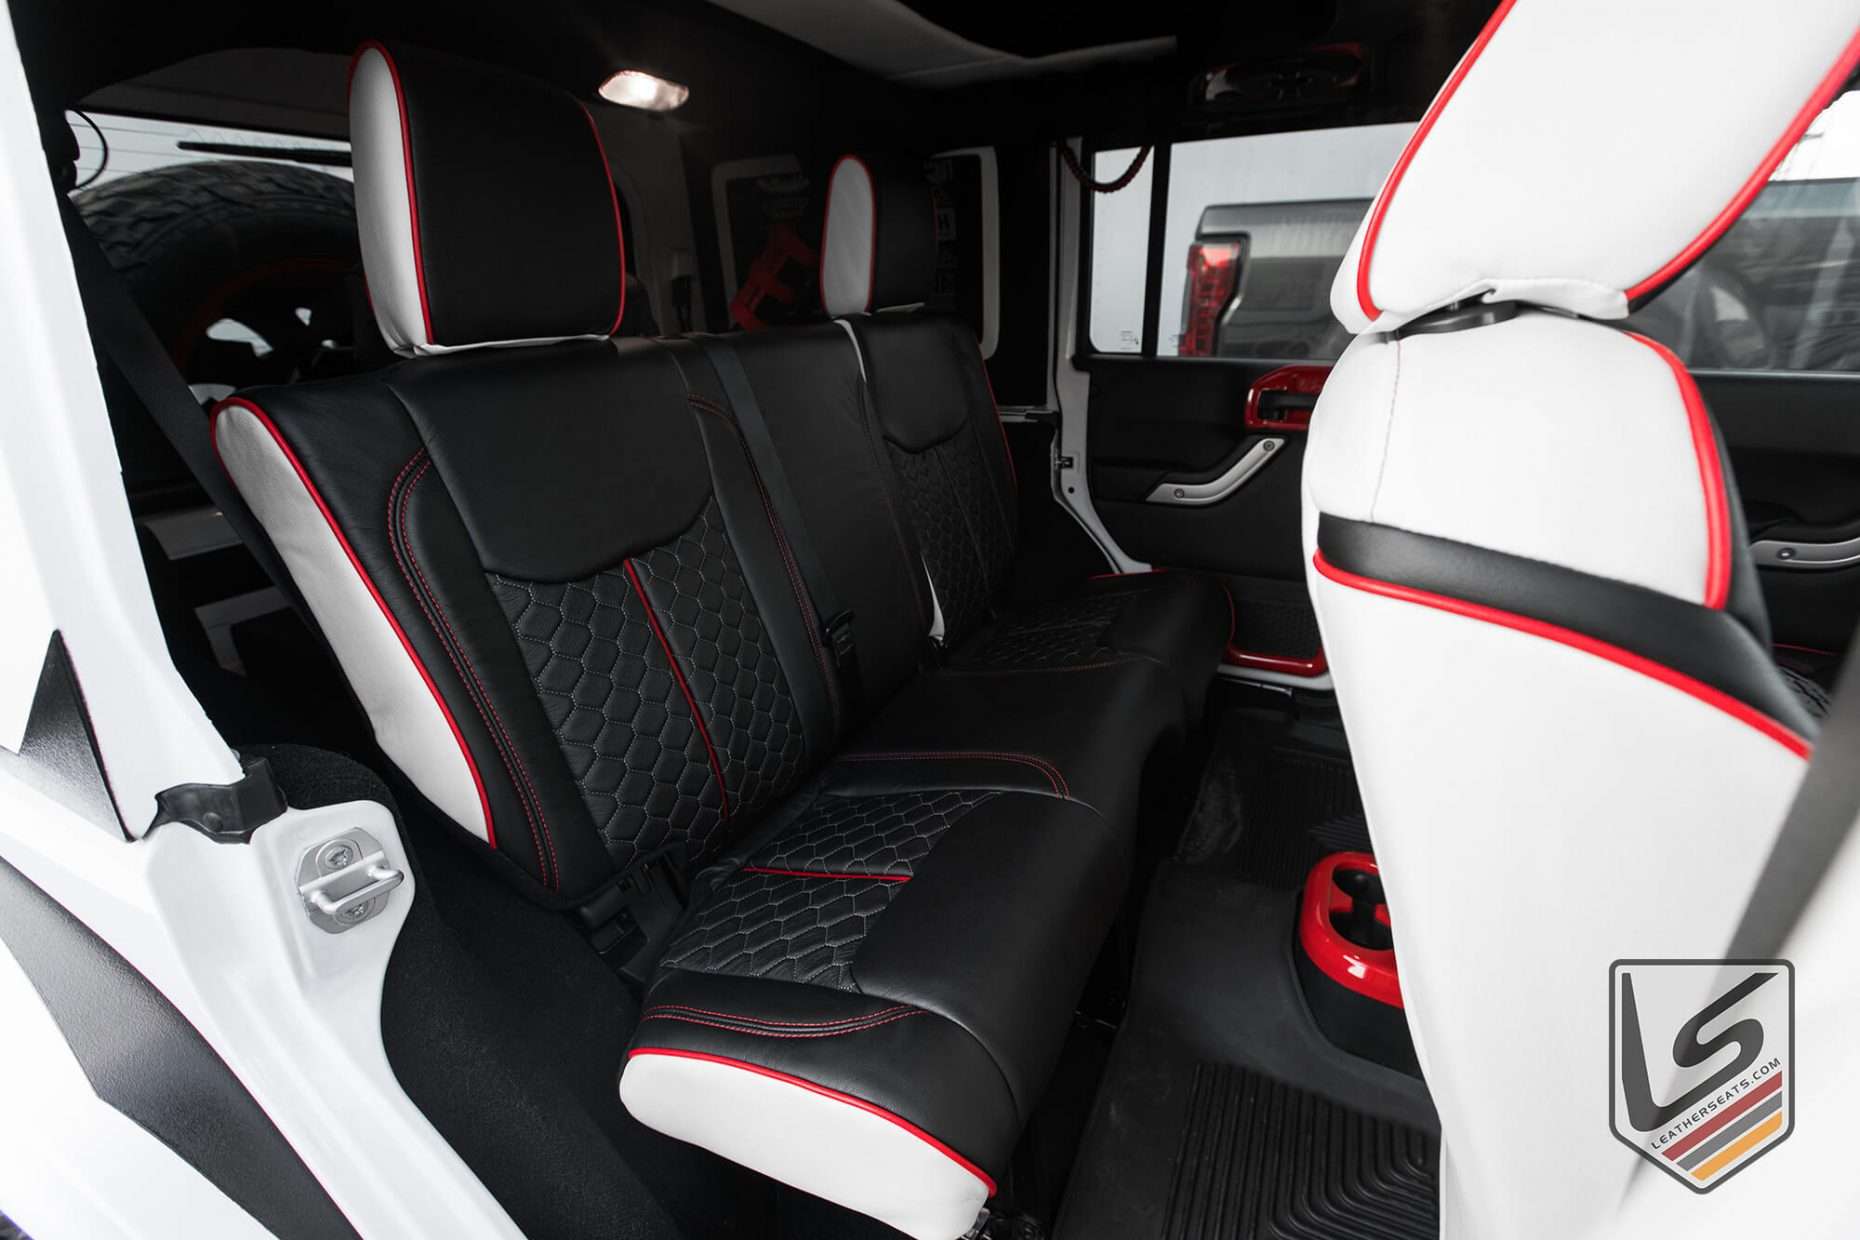 CustomCNC stitched leather seats in White and Black